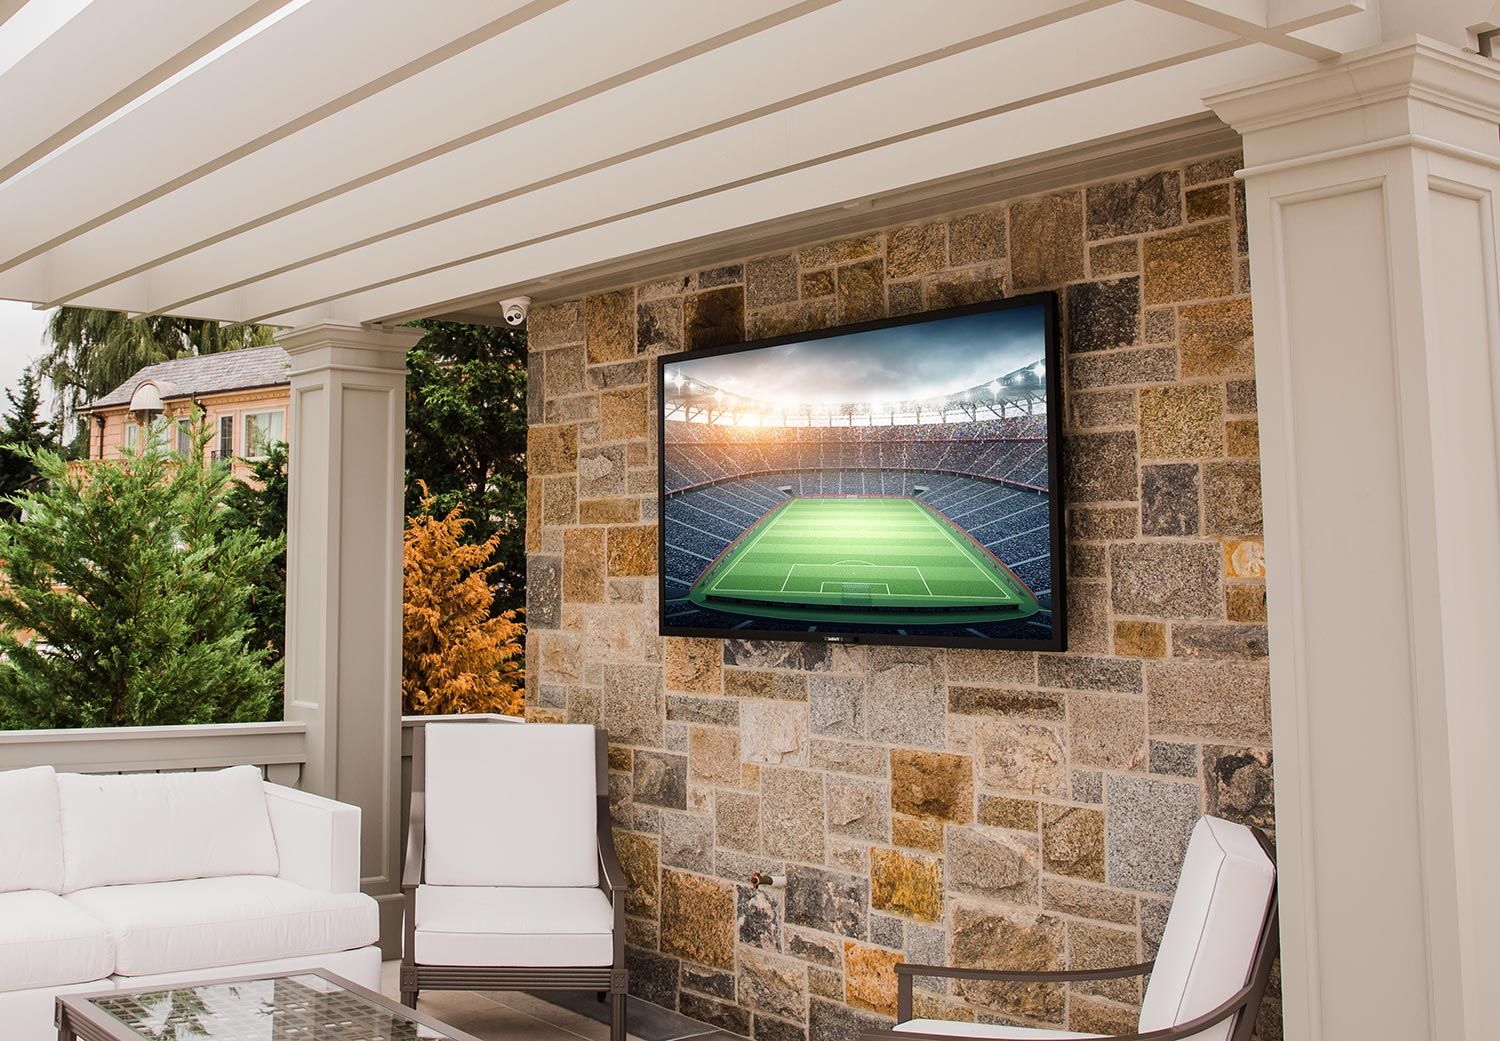 TV in a covered porch